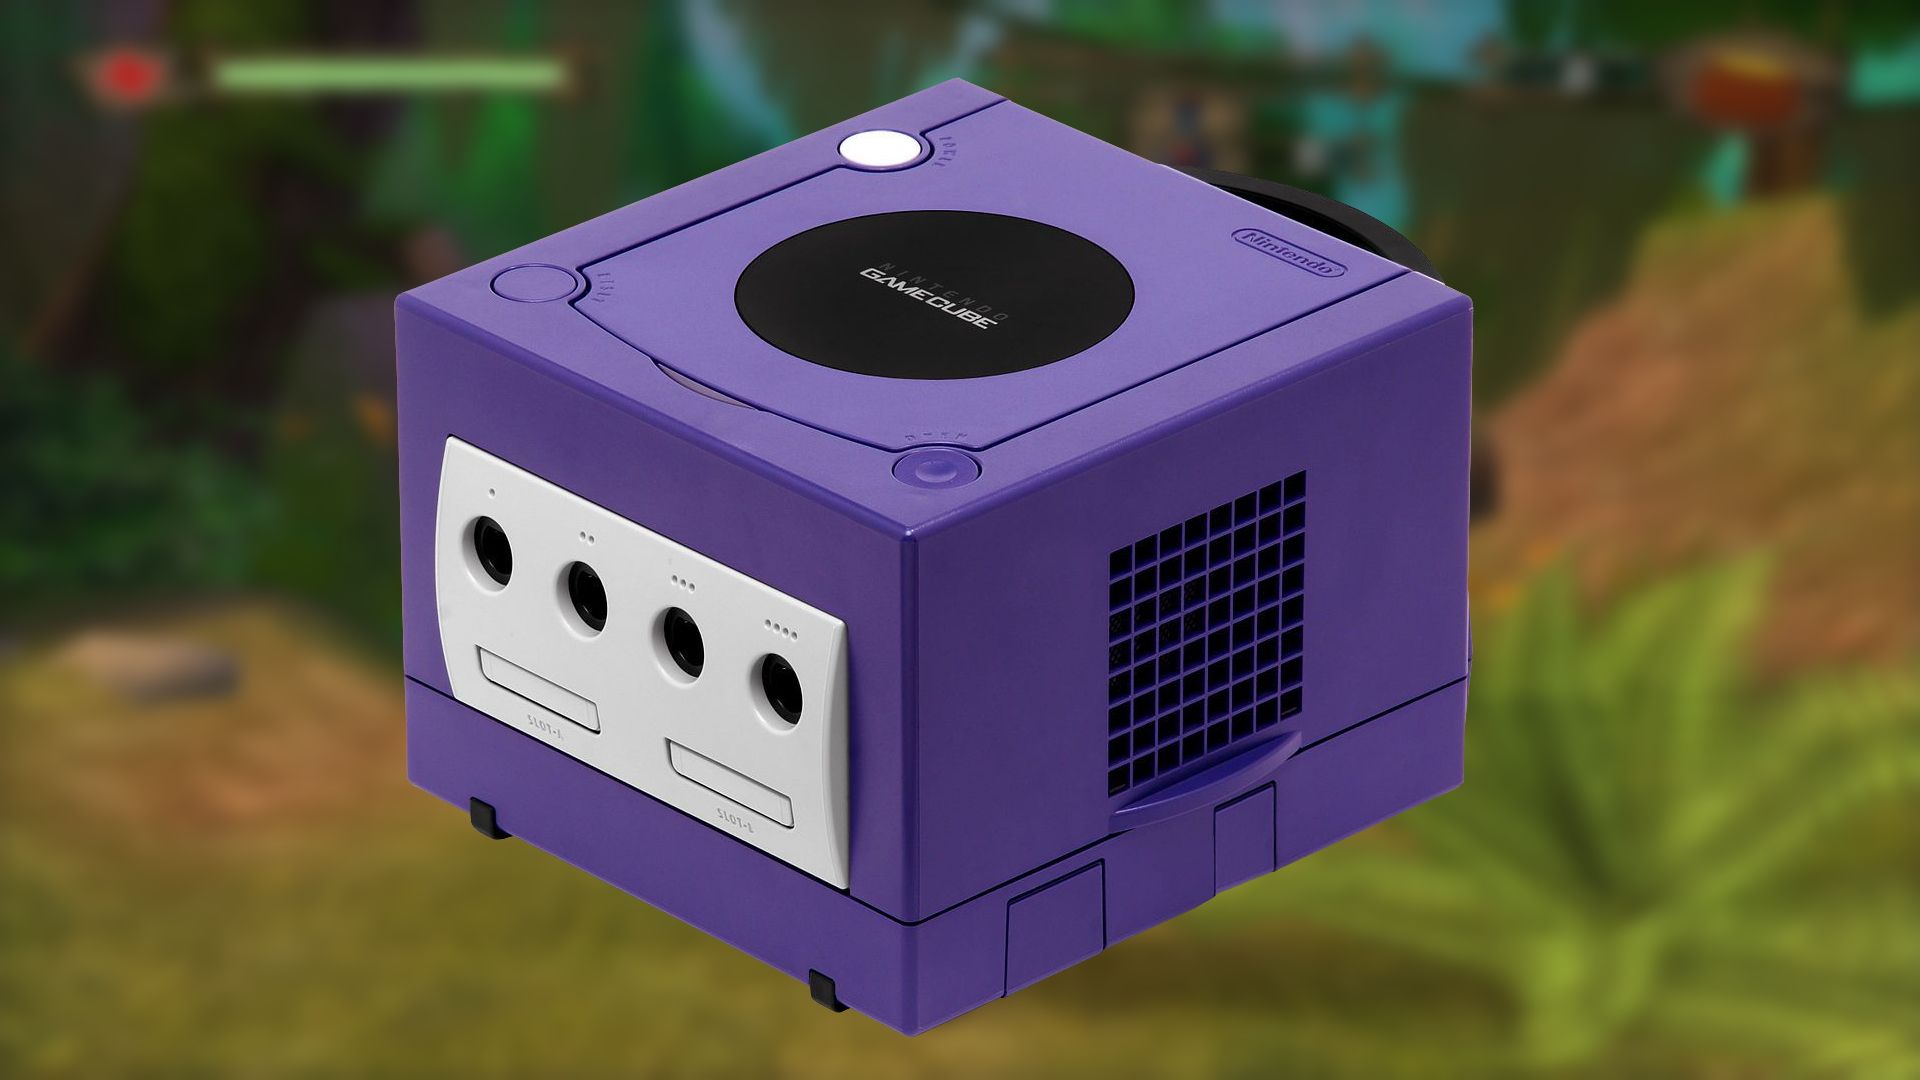 An image of a Nintendo GameCube set against a blurred screenshot from Shrek 2 on GameCube.